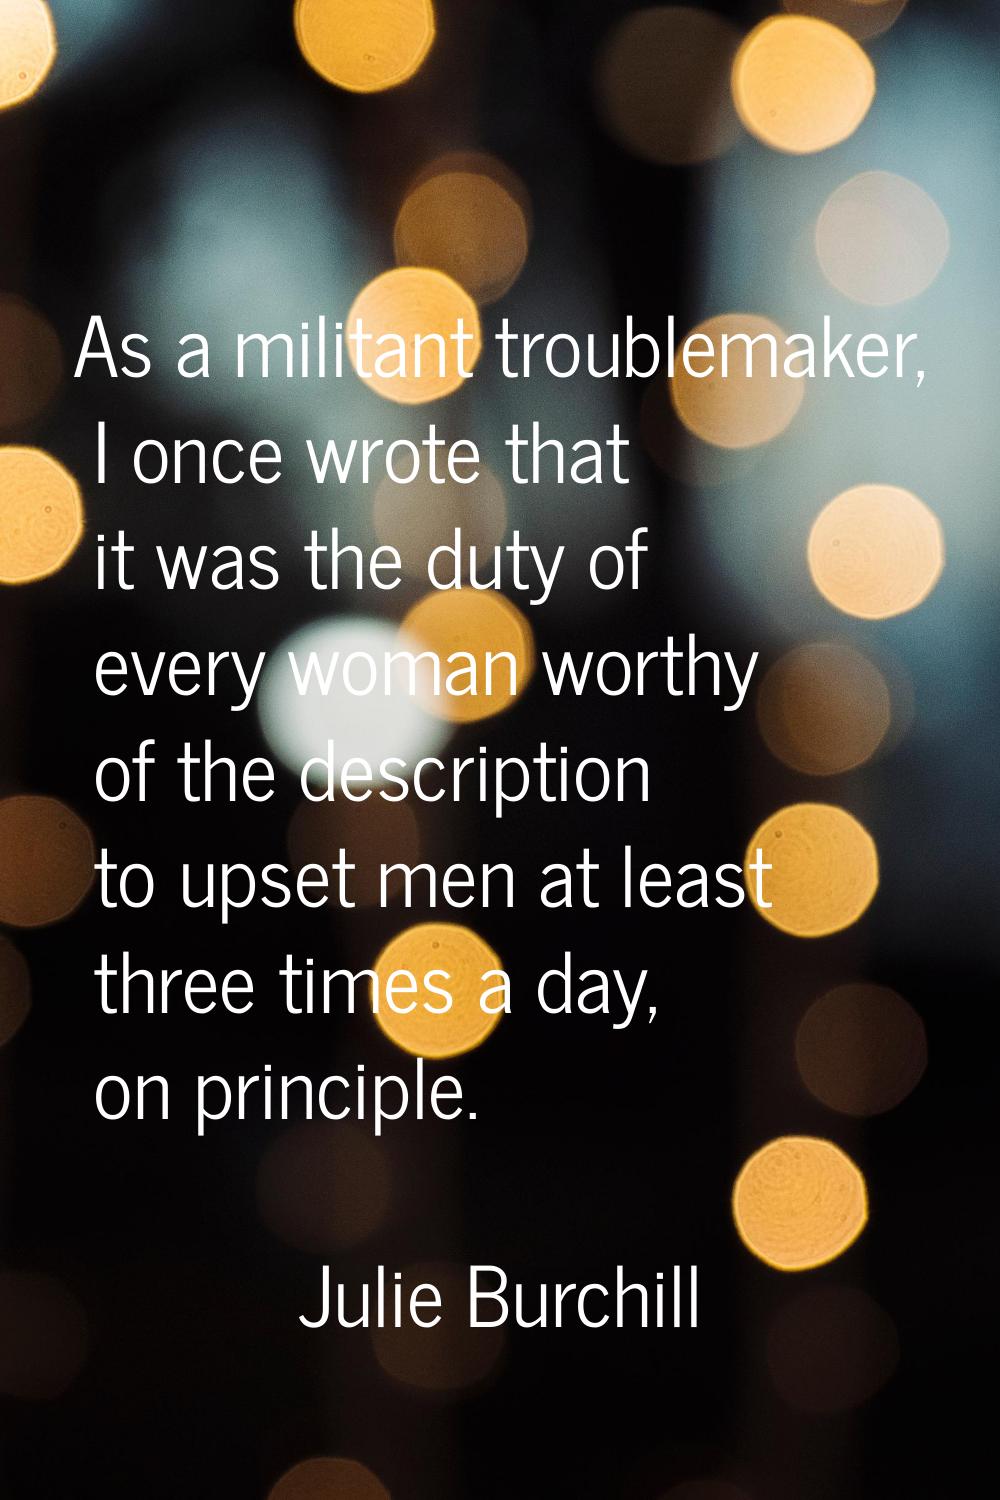 As a militant troublemaker, I once wrote that it was the duty of every woman worthy of the descript